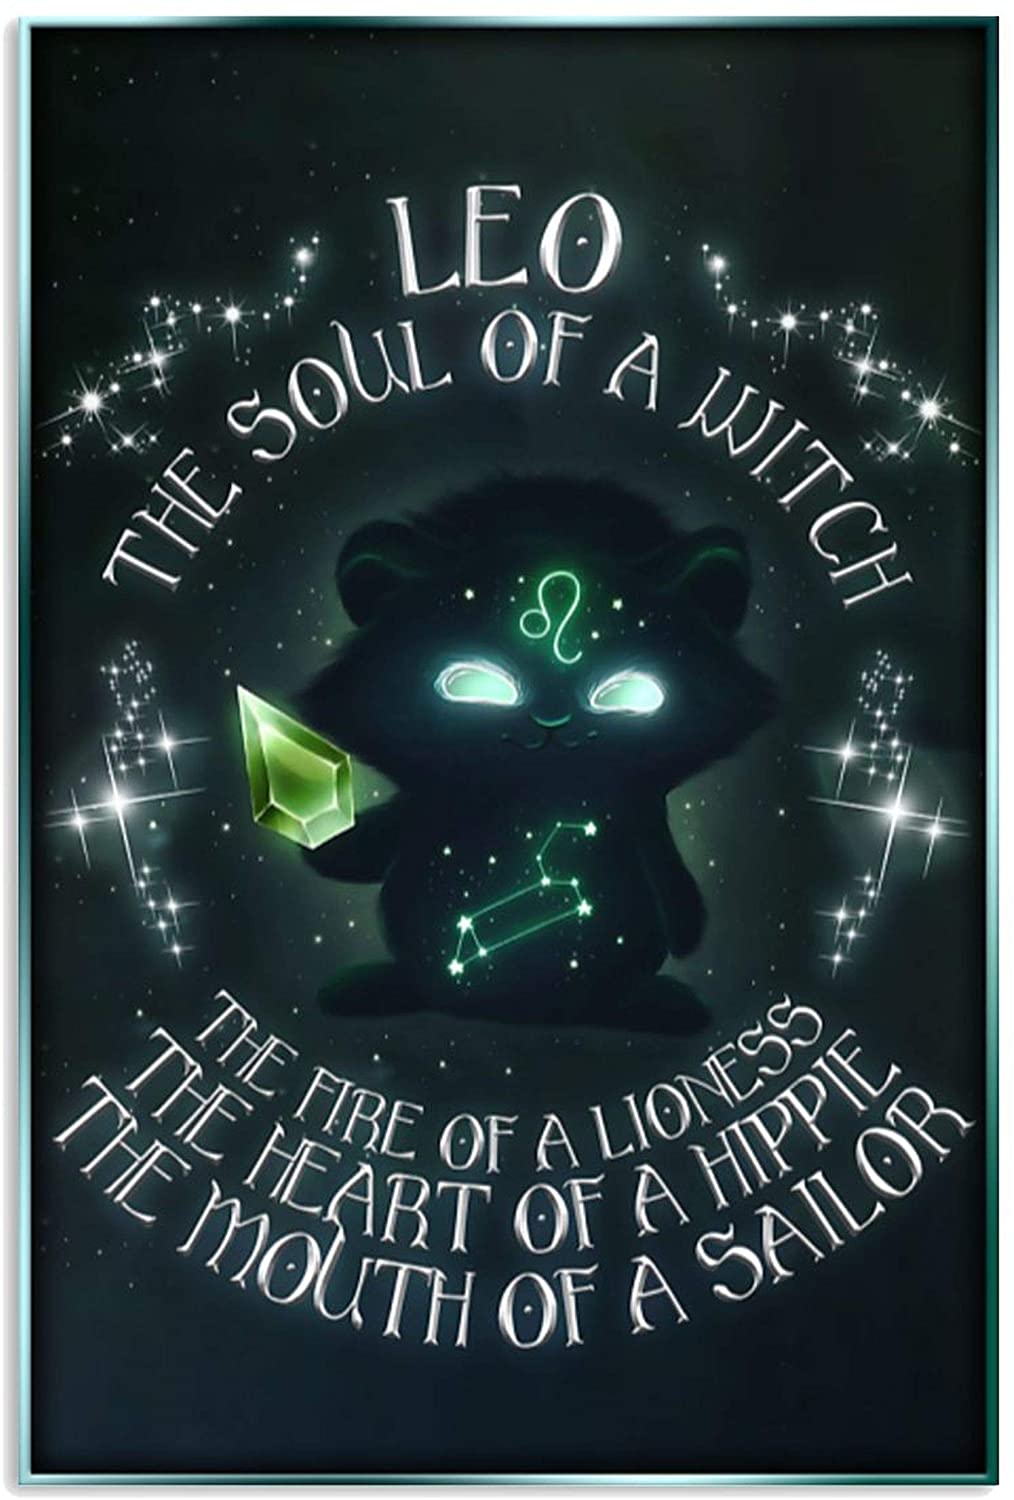 Yoga Leo The Soul of A Witch The Fire of A Lioness The Heart of A Hippie The Mouth of A Sailor Poster